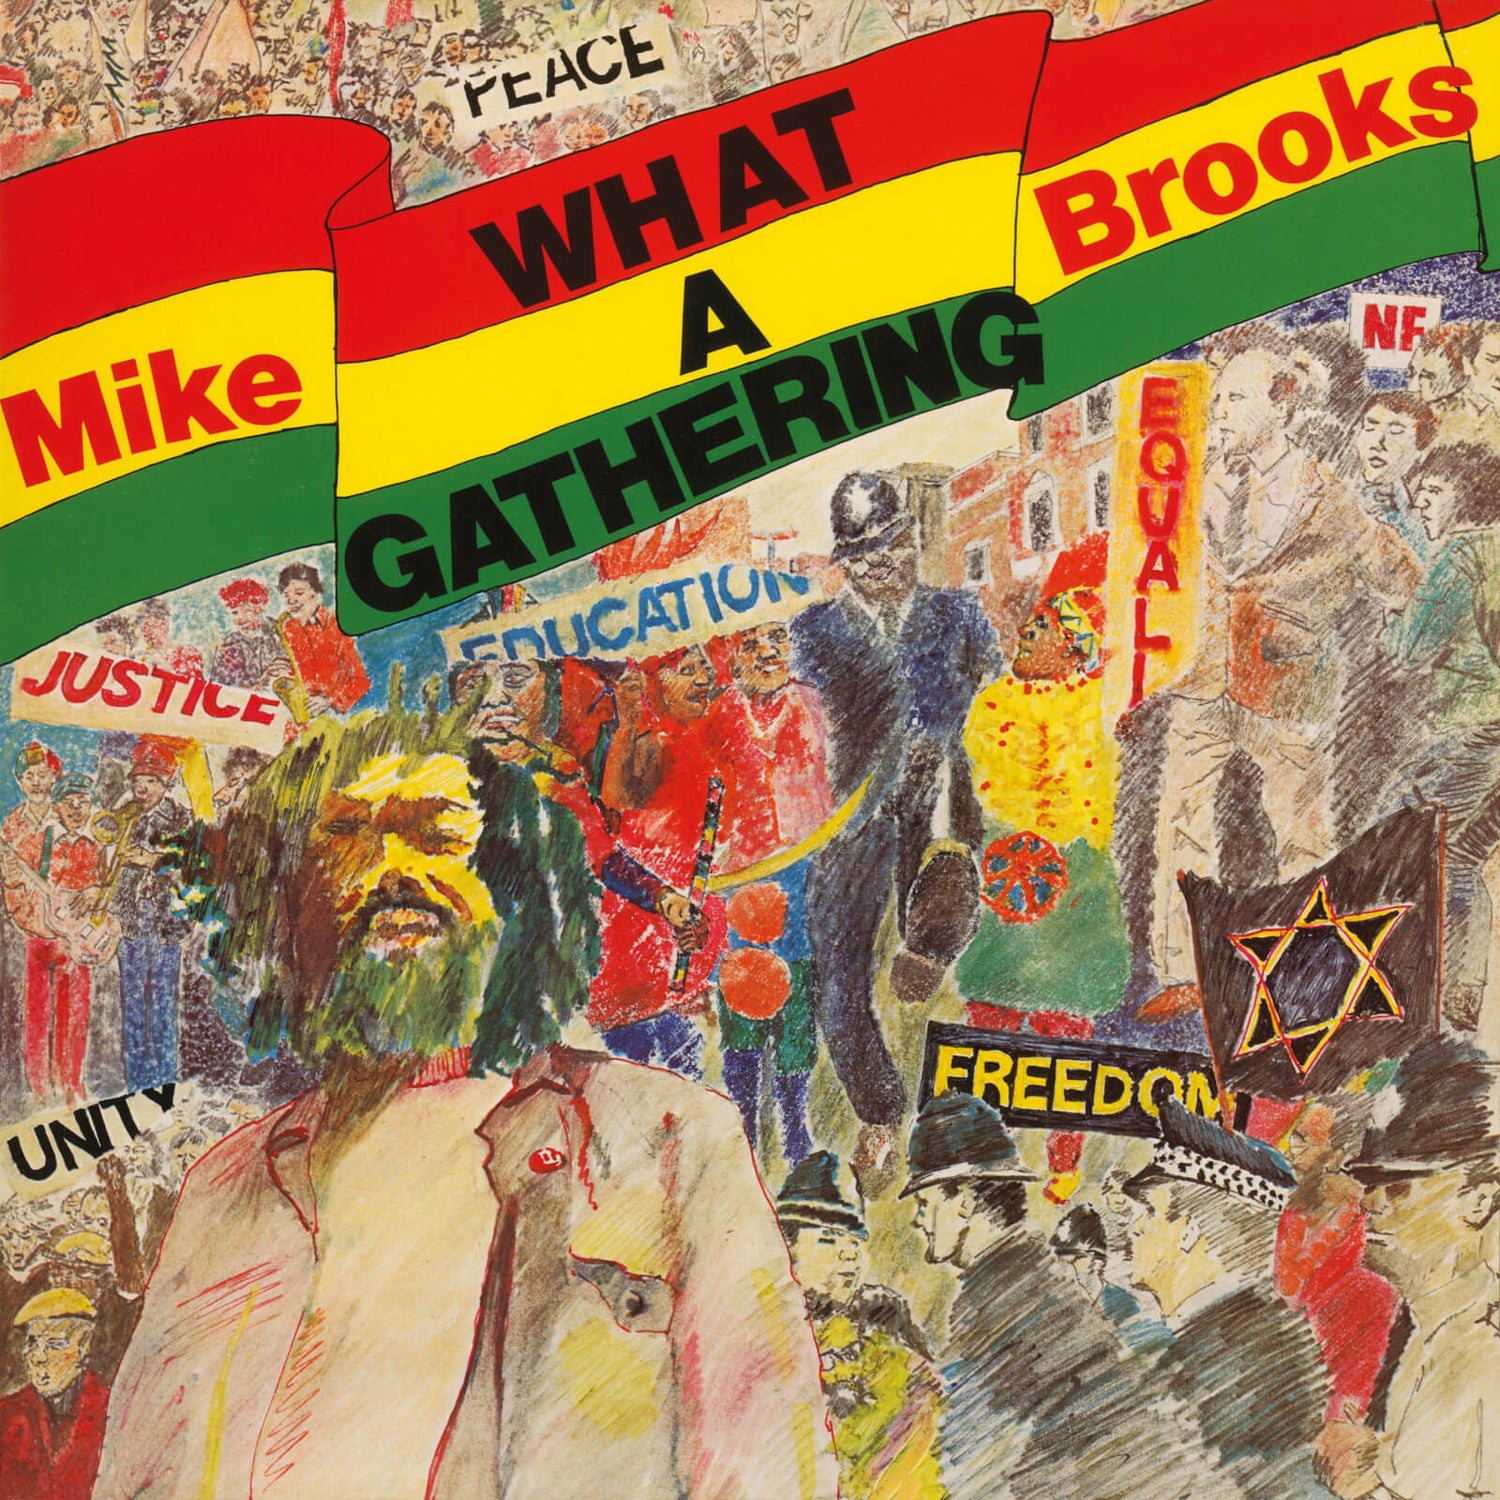 Mike Brooks - What A Gathering 180g Vinyl